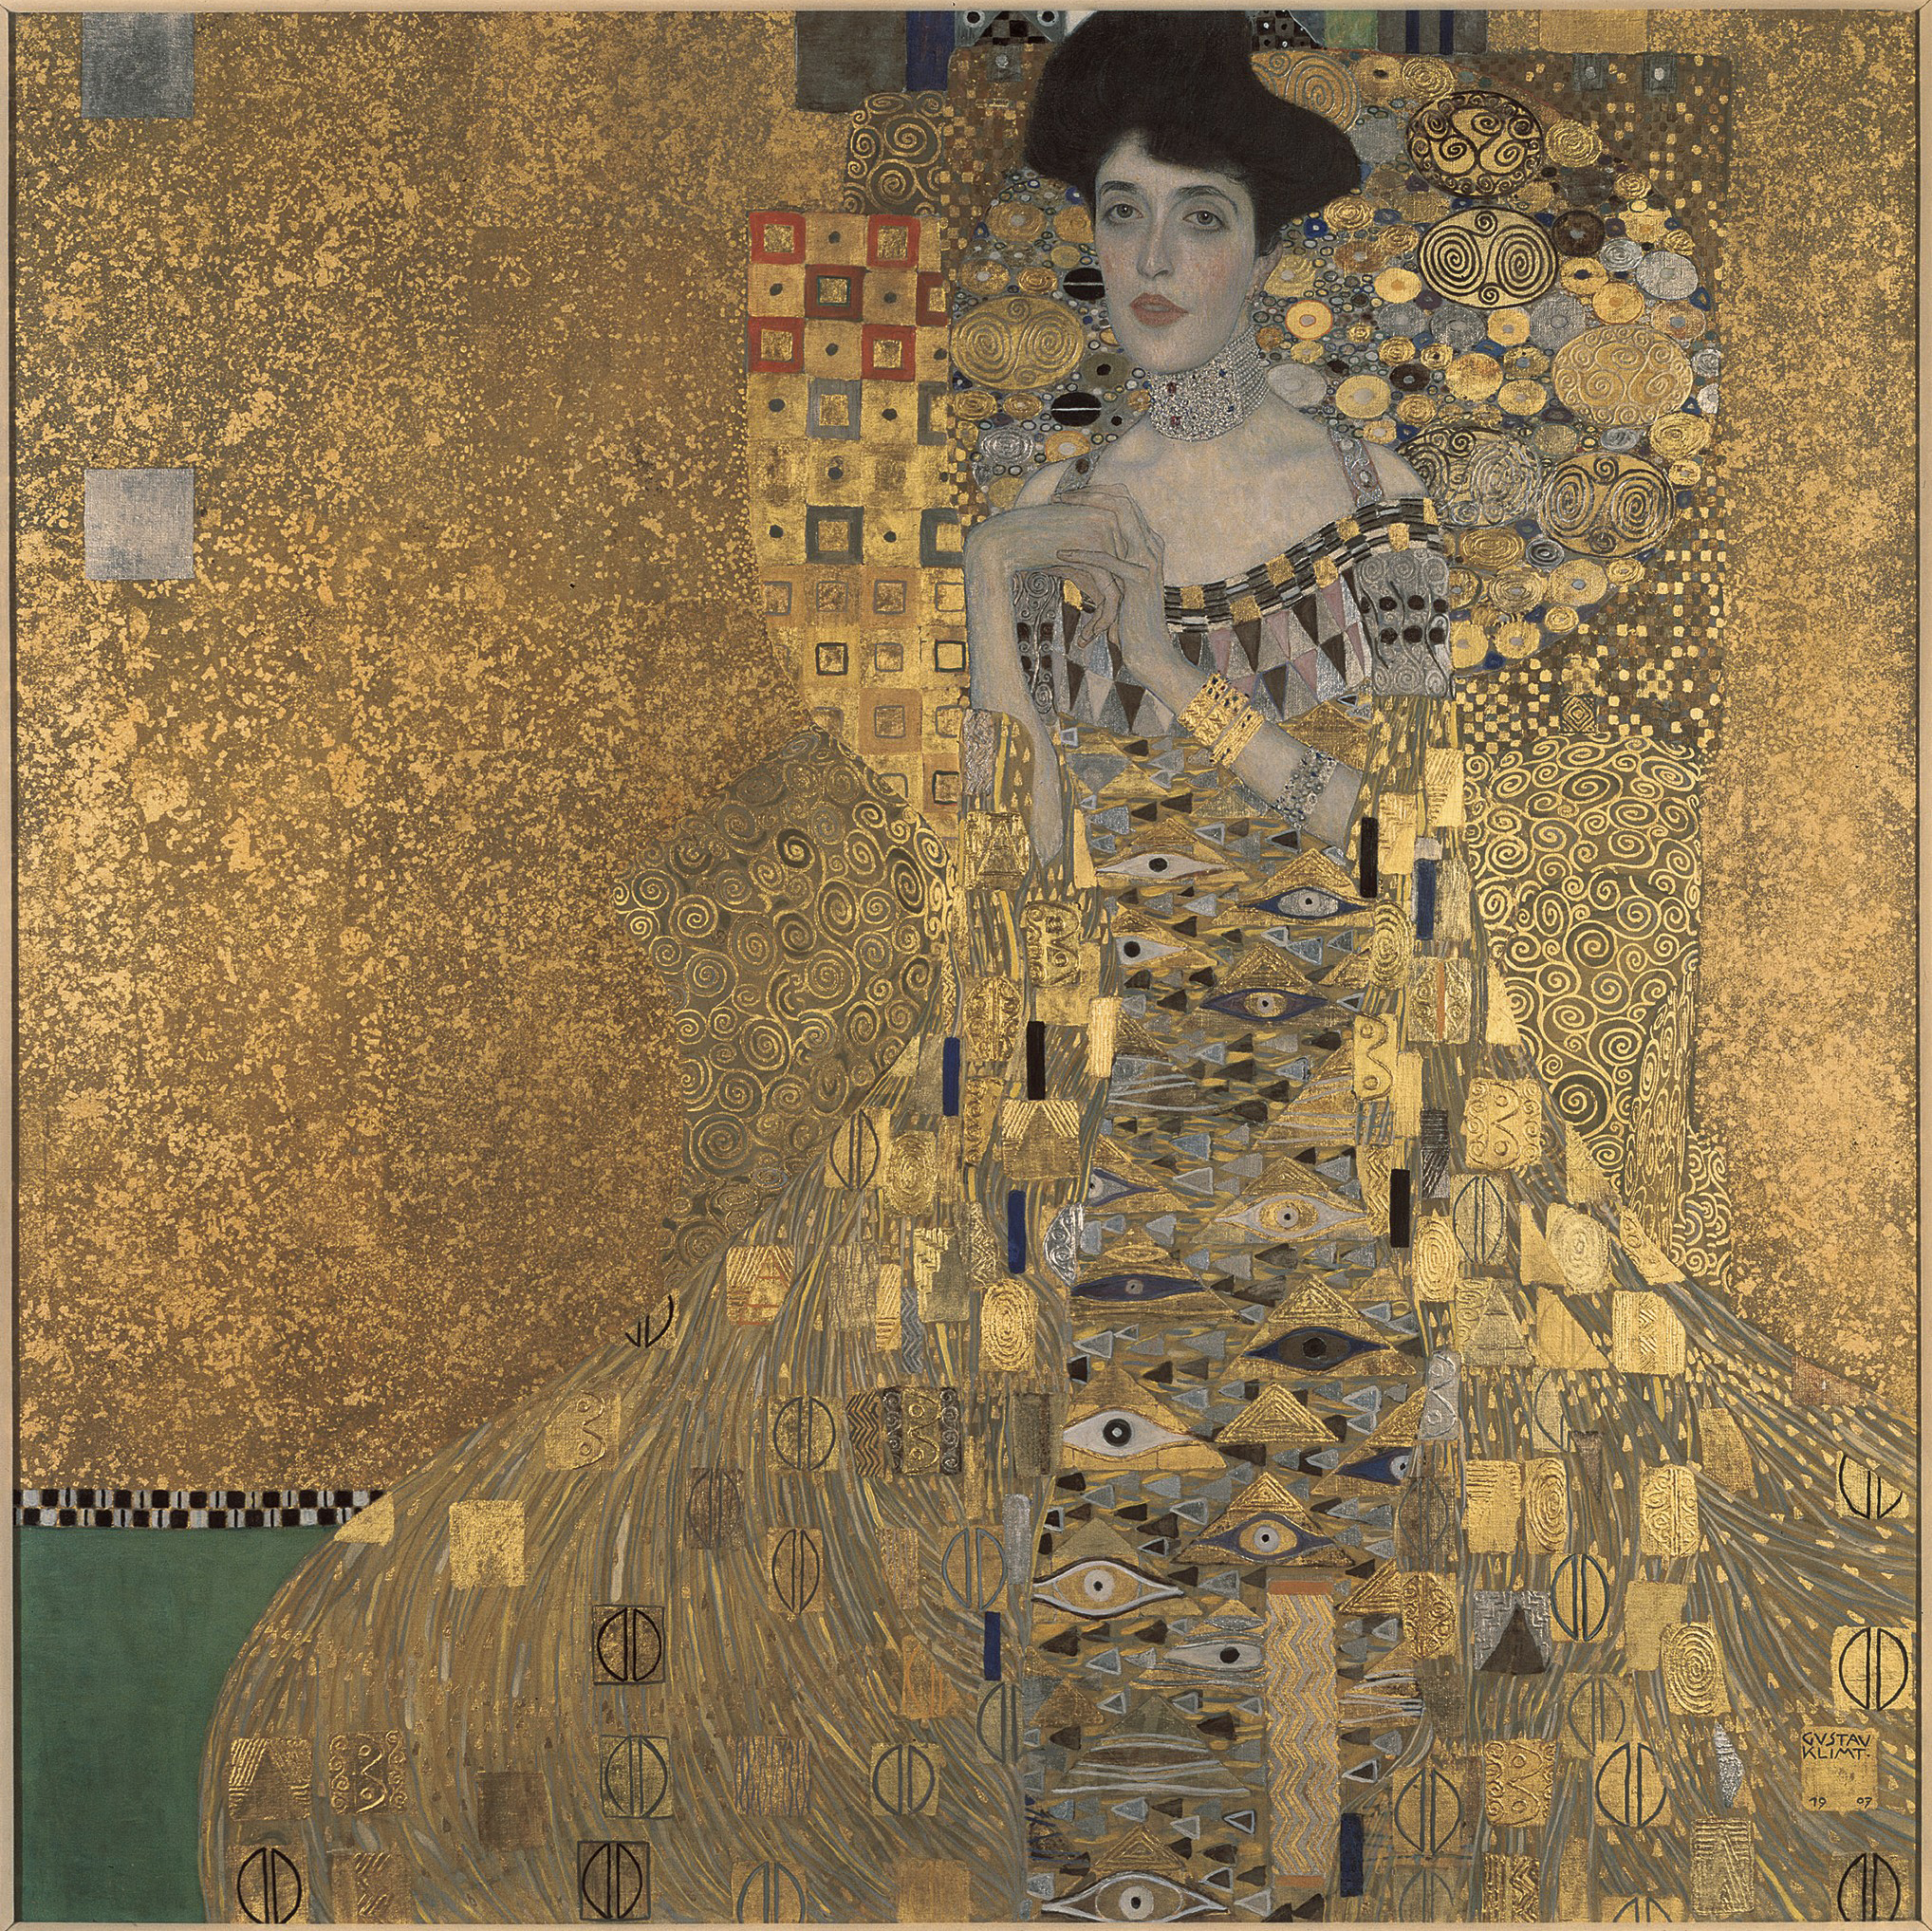 A woman wearing jewelry and a gold dress